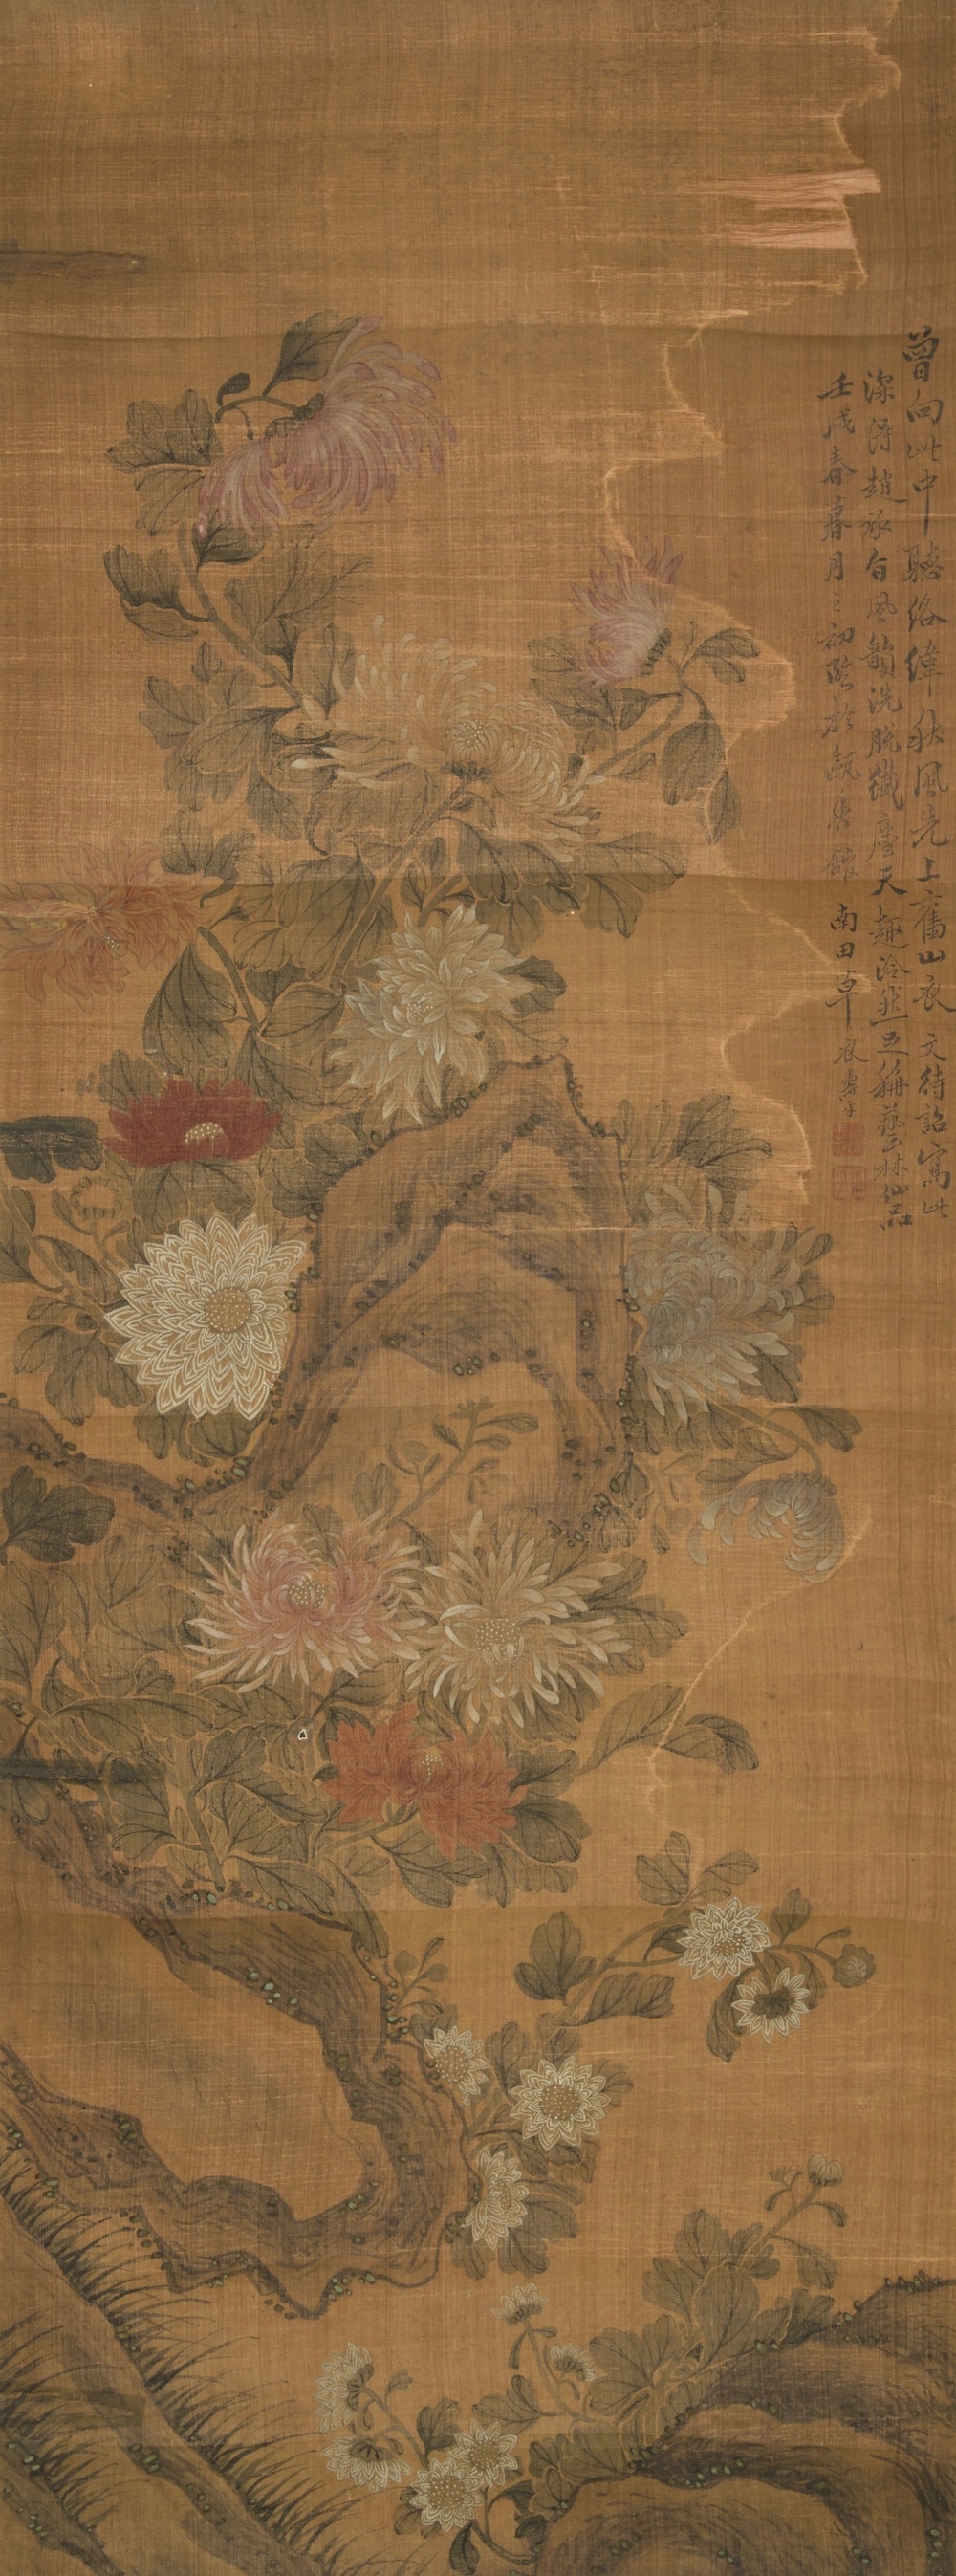 Yun Shou Ping (China, 1633-1690): Flowers on a rock, ink and color on silk, mounted